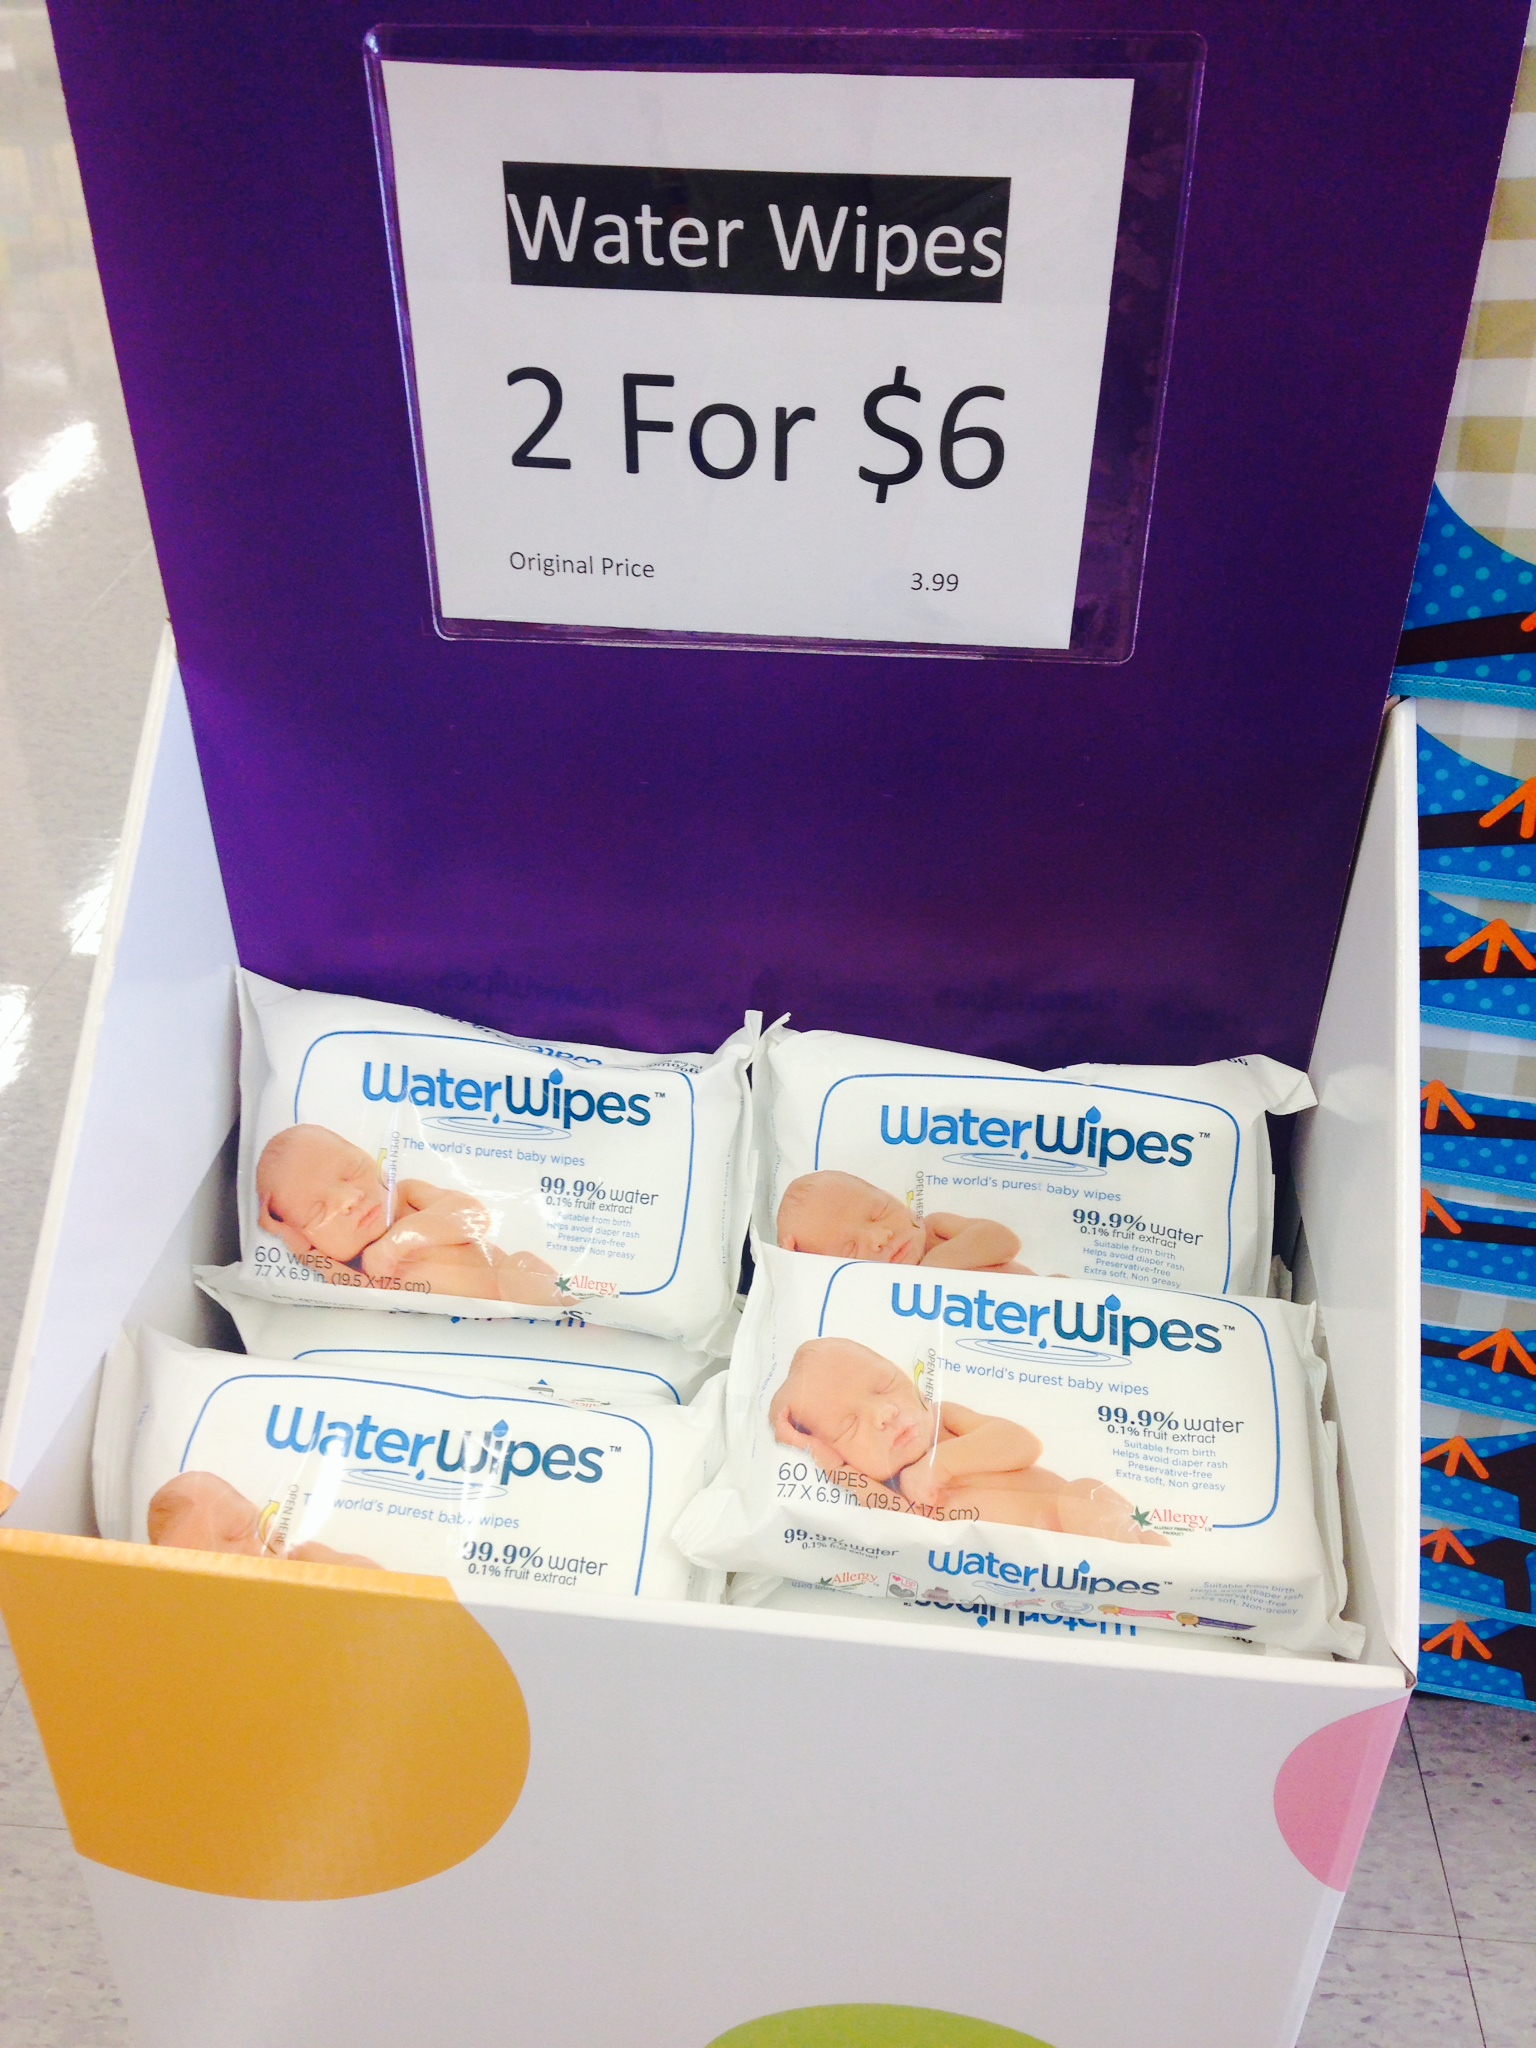 WaterWipes- finally a chemical free option for my baby's sensitive skin!